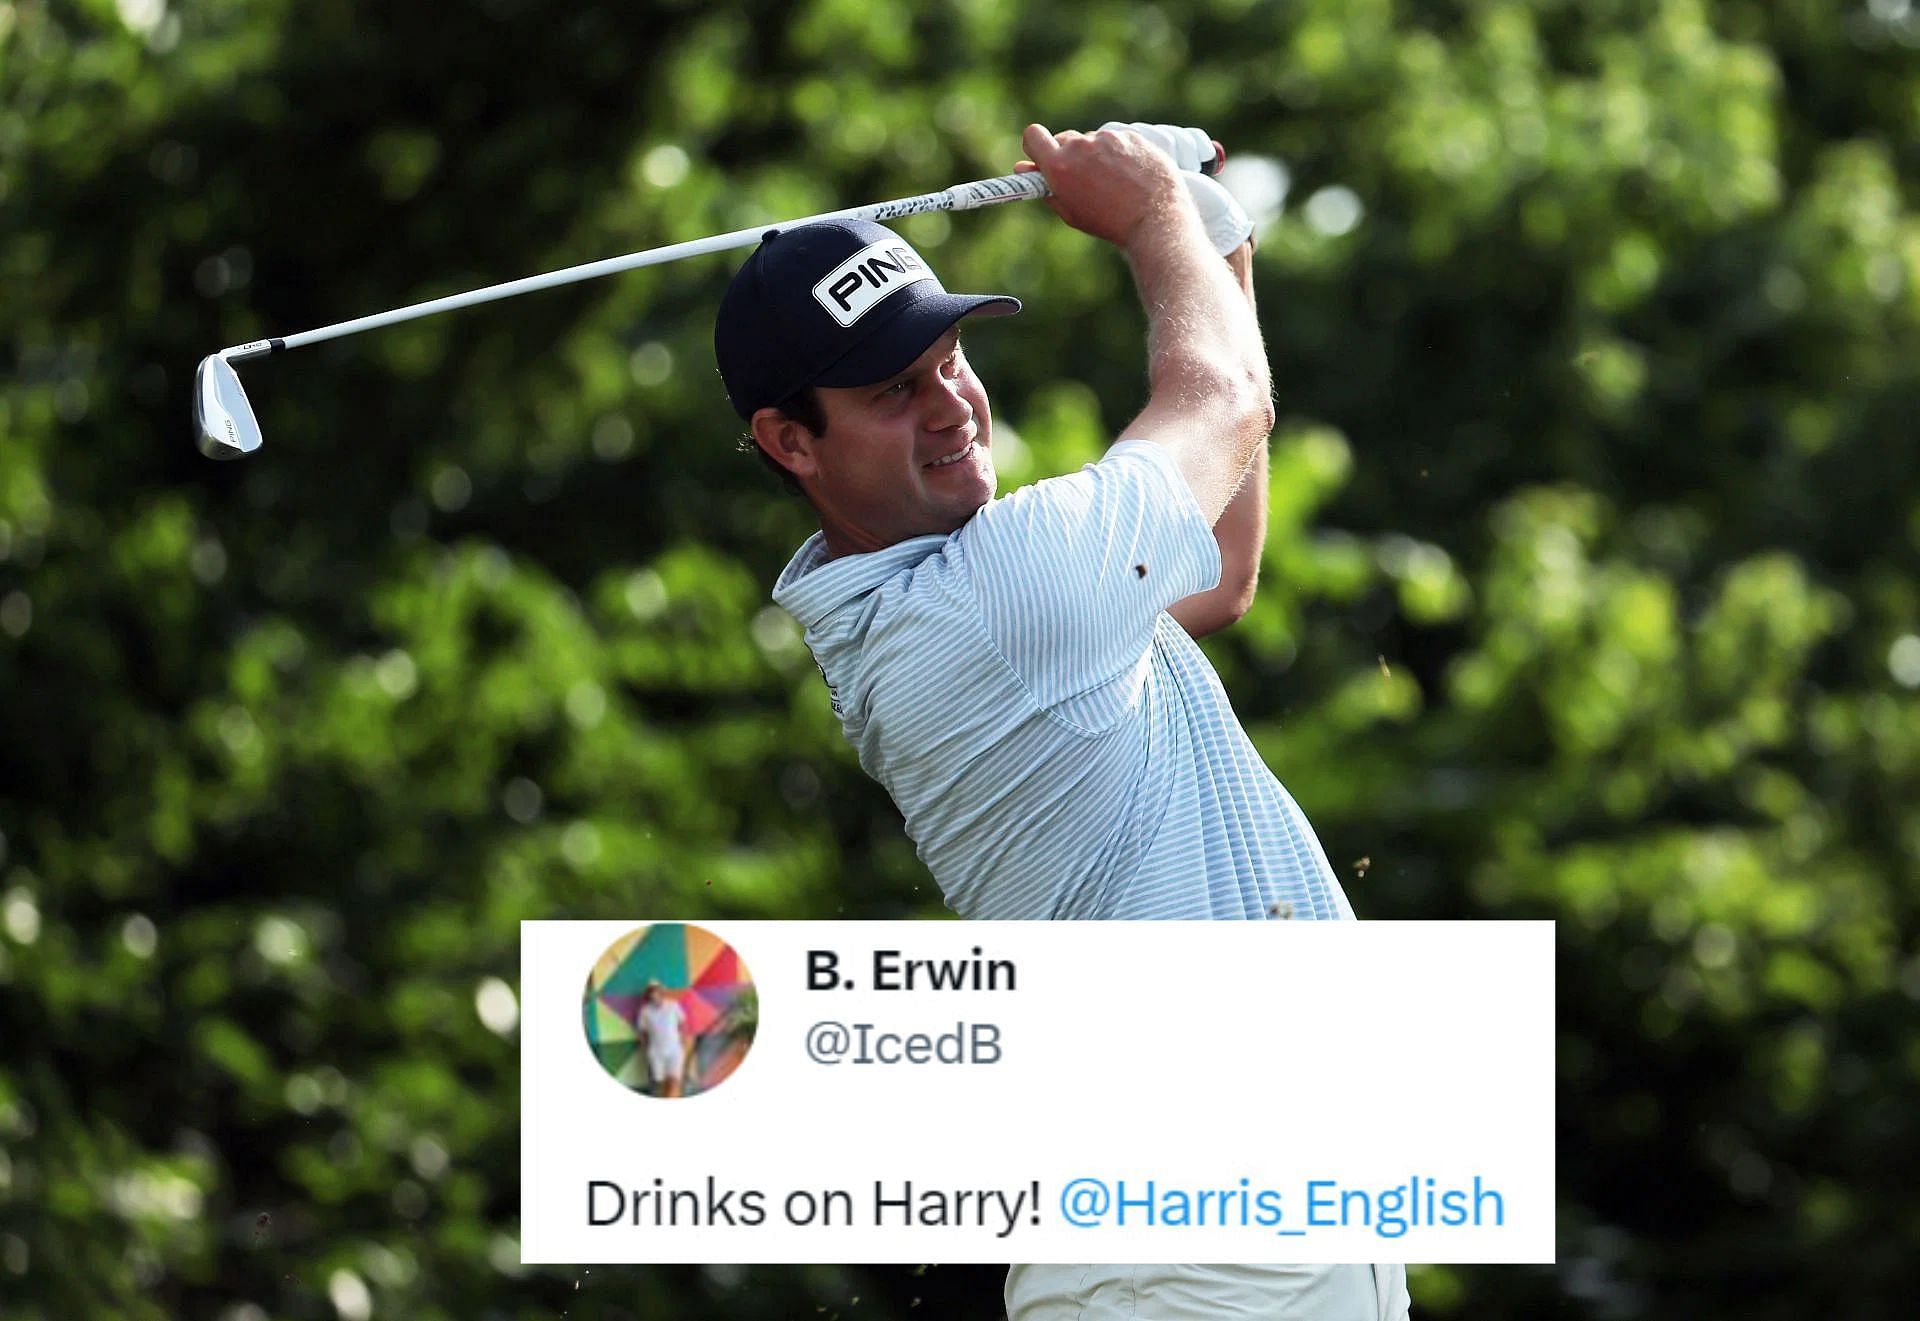 Harris English scoring a hole-in-one at the Charles Schwab Challenge (Image via Getty and Twitter).